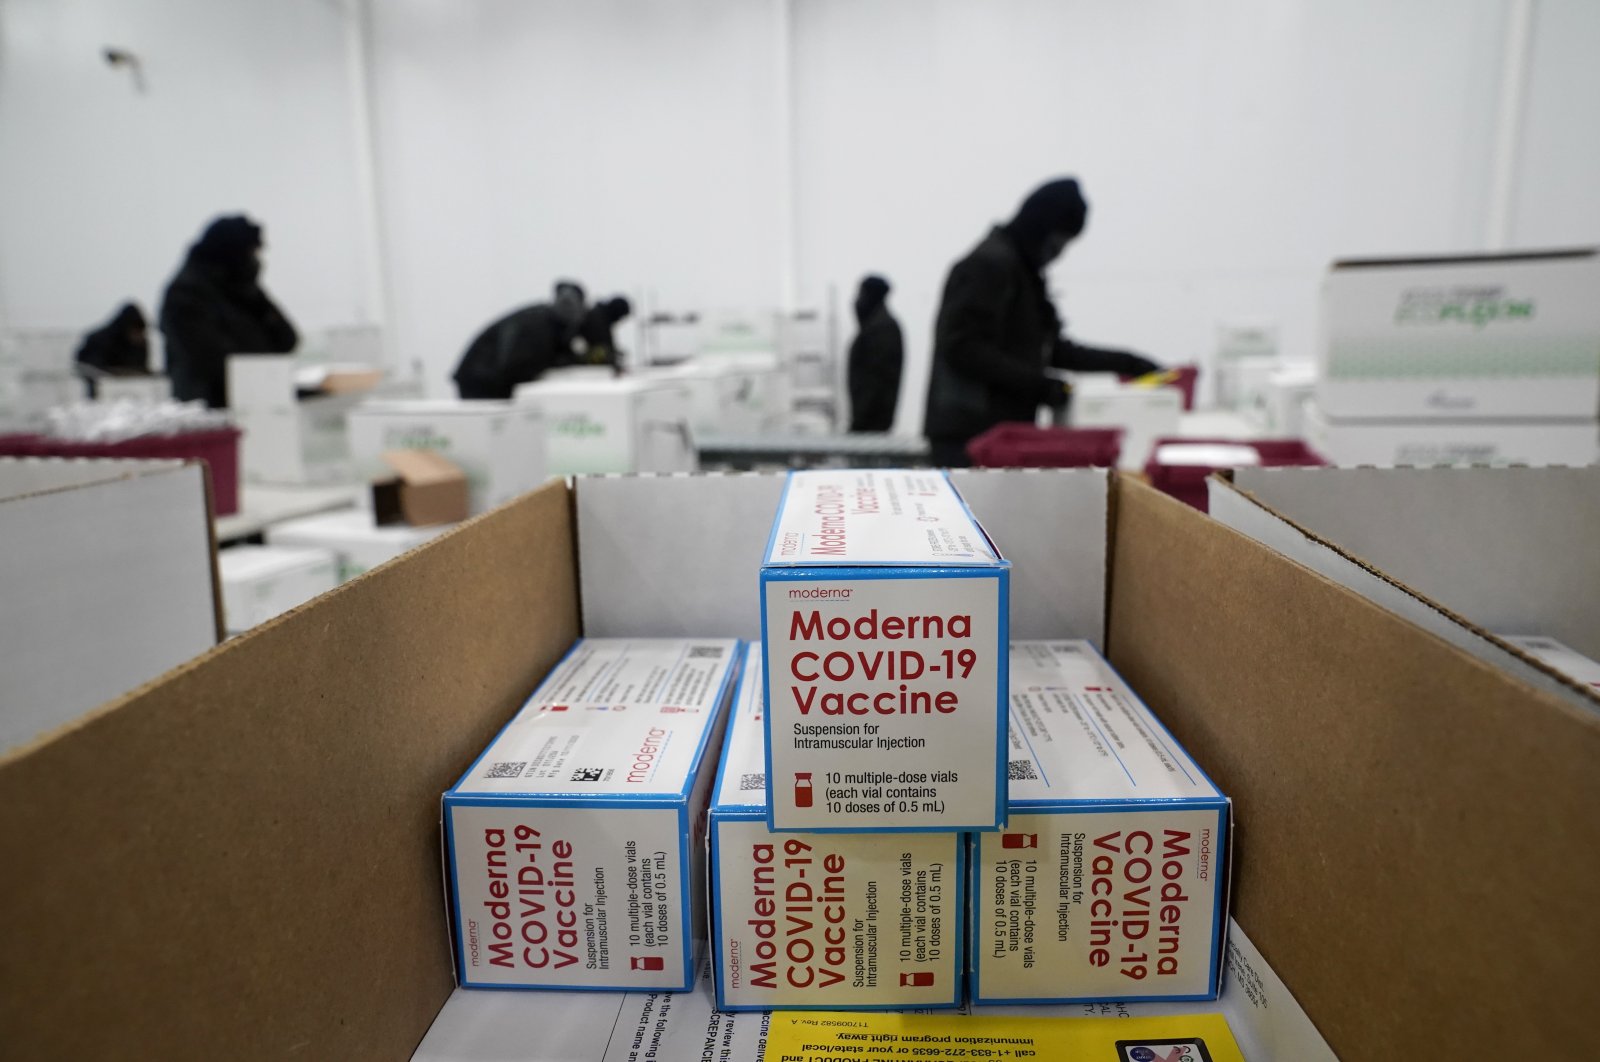 Boxes containing the Moderna COVID-19 vaccine are prepared to be shipped at the McKesson distribution center in Olive Branch, Mississipi, U.S., Dec. 20, 2020. (AP Photo)